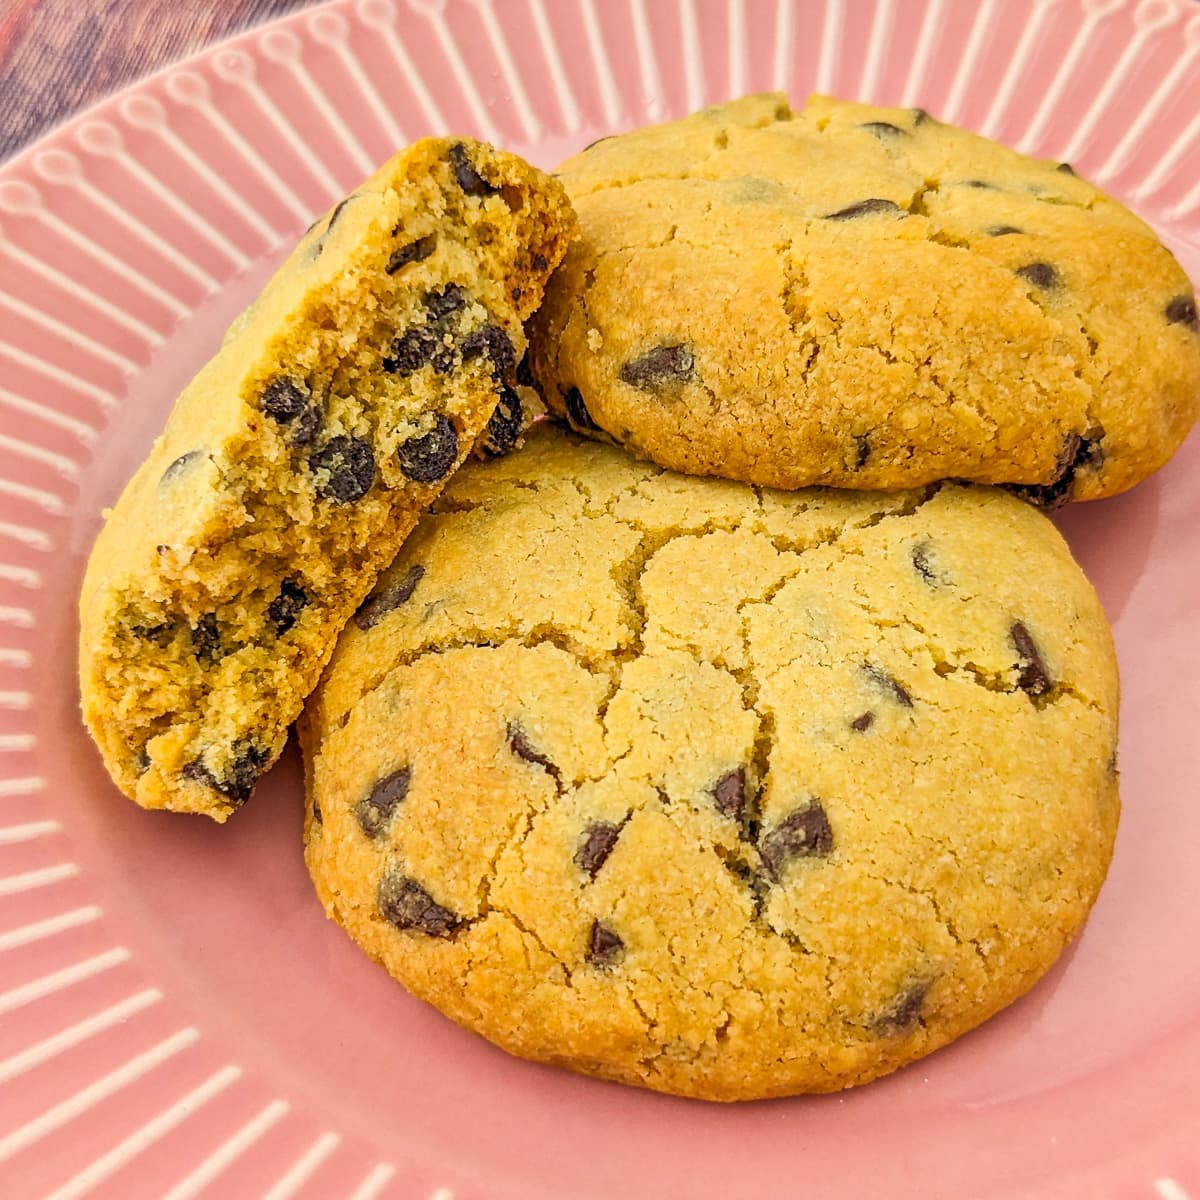 Close look of 2 and halve chocolate chip cookies on a pink plate.